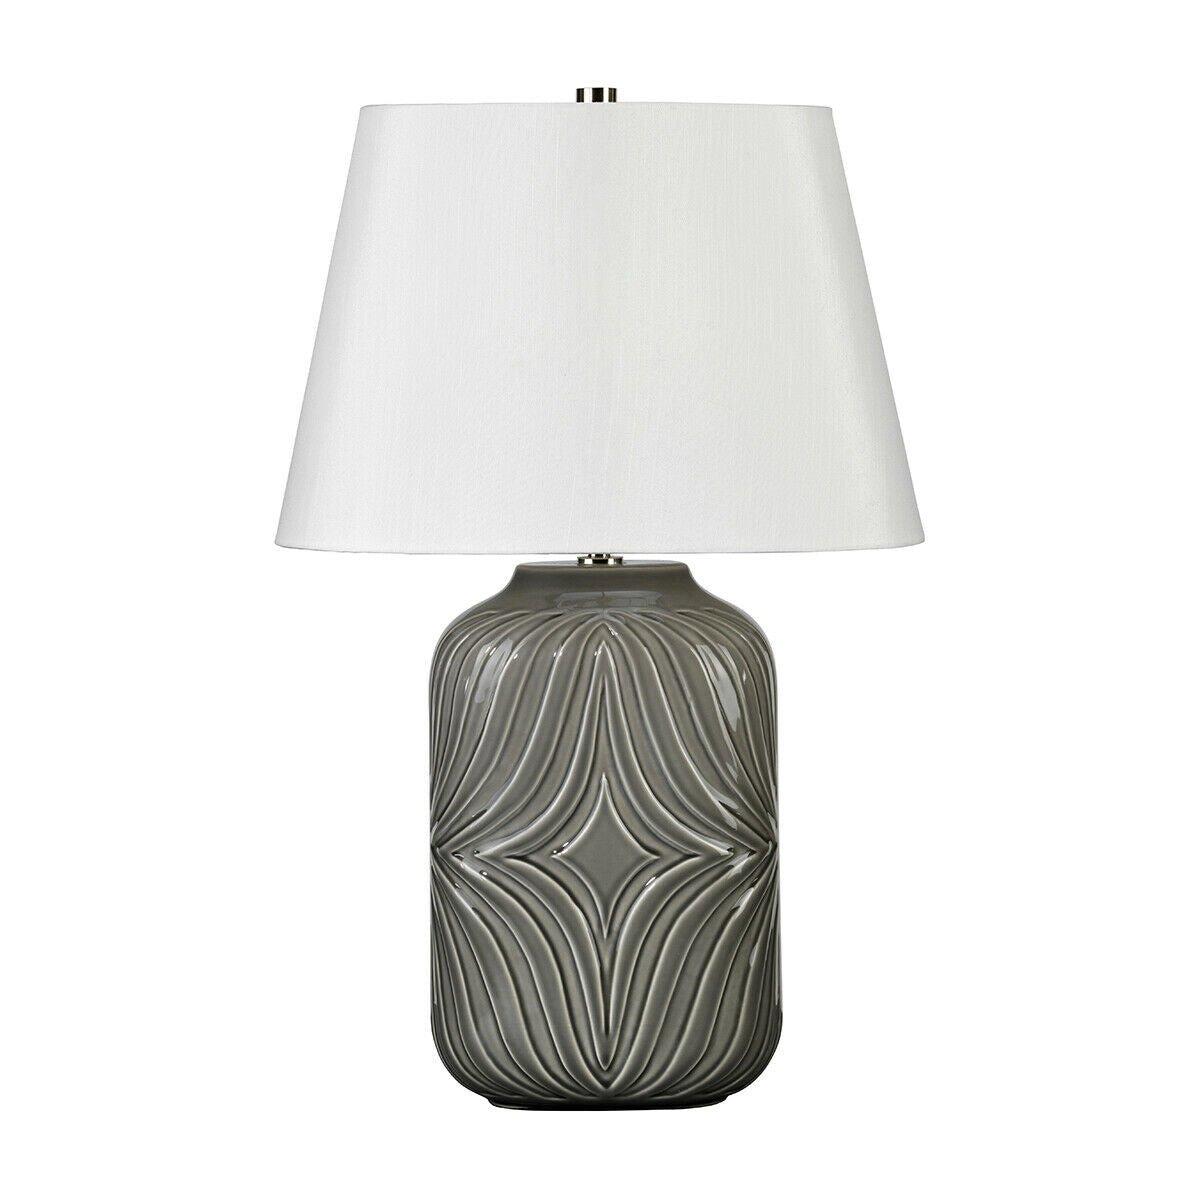 Table Lamp Diamond Sculpted Patters Off White Shade Grey Glaze LED E27 60W